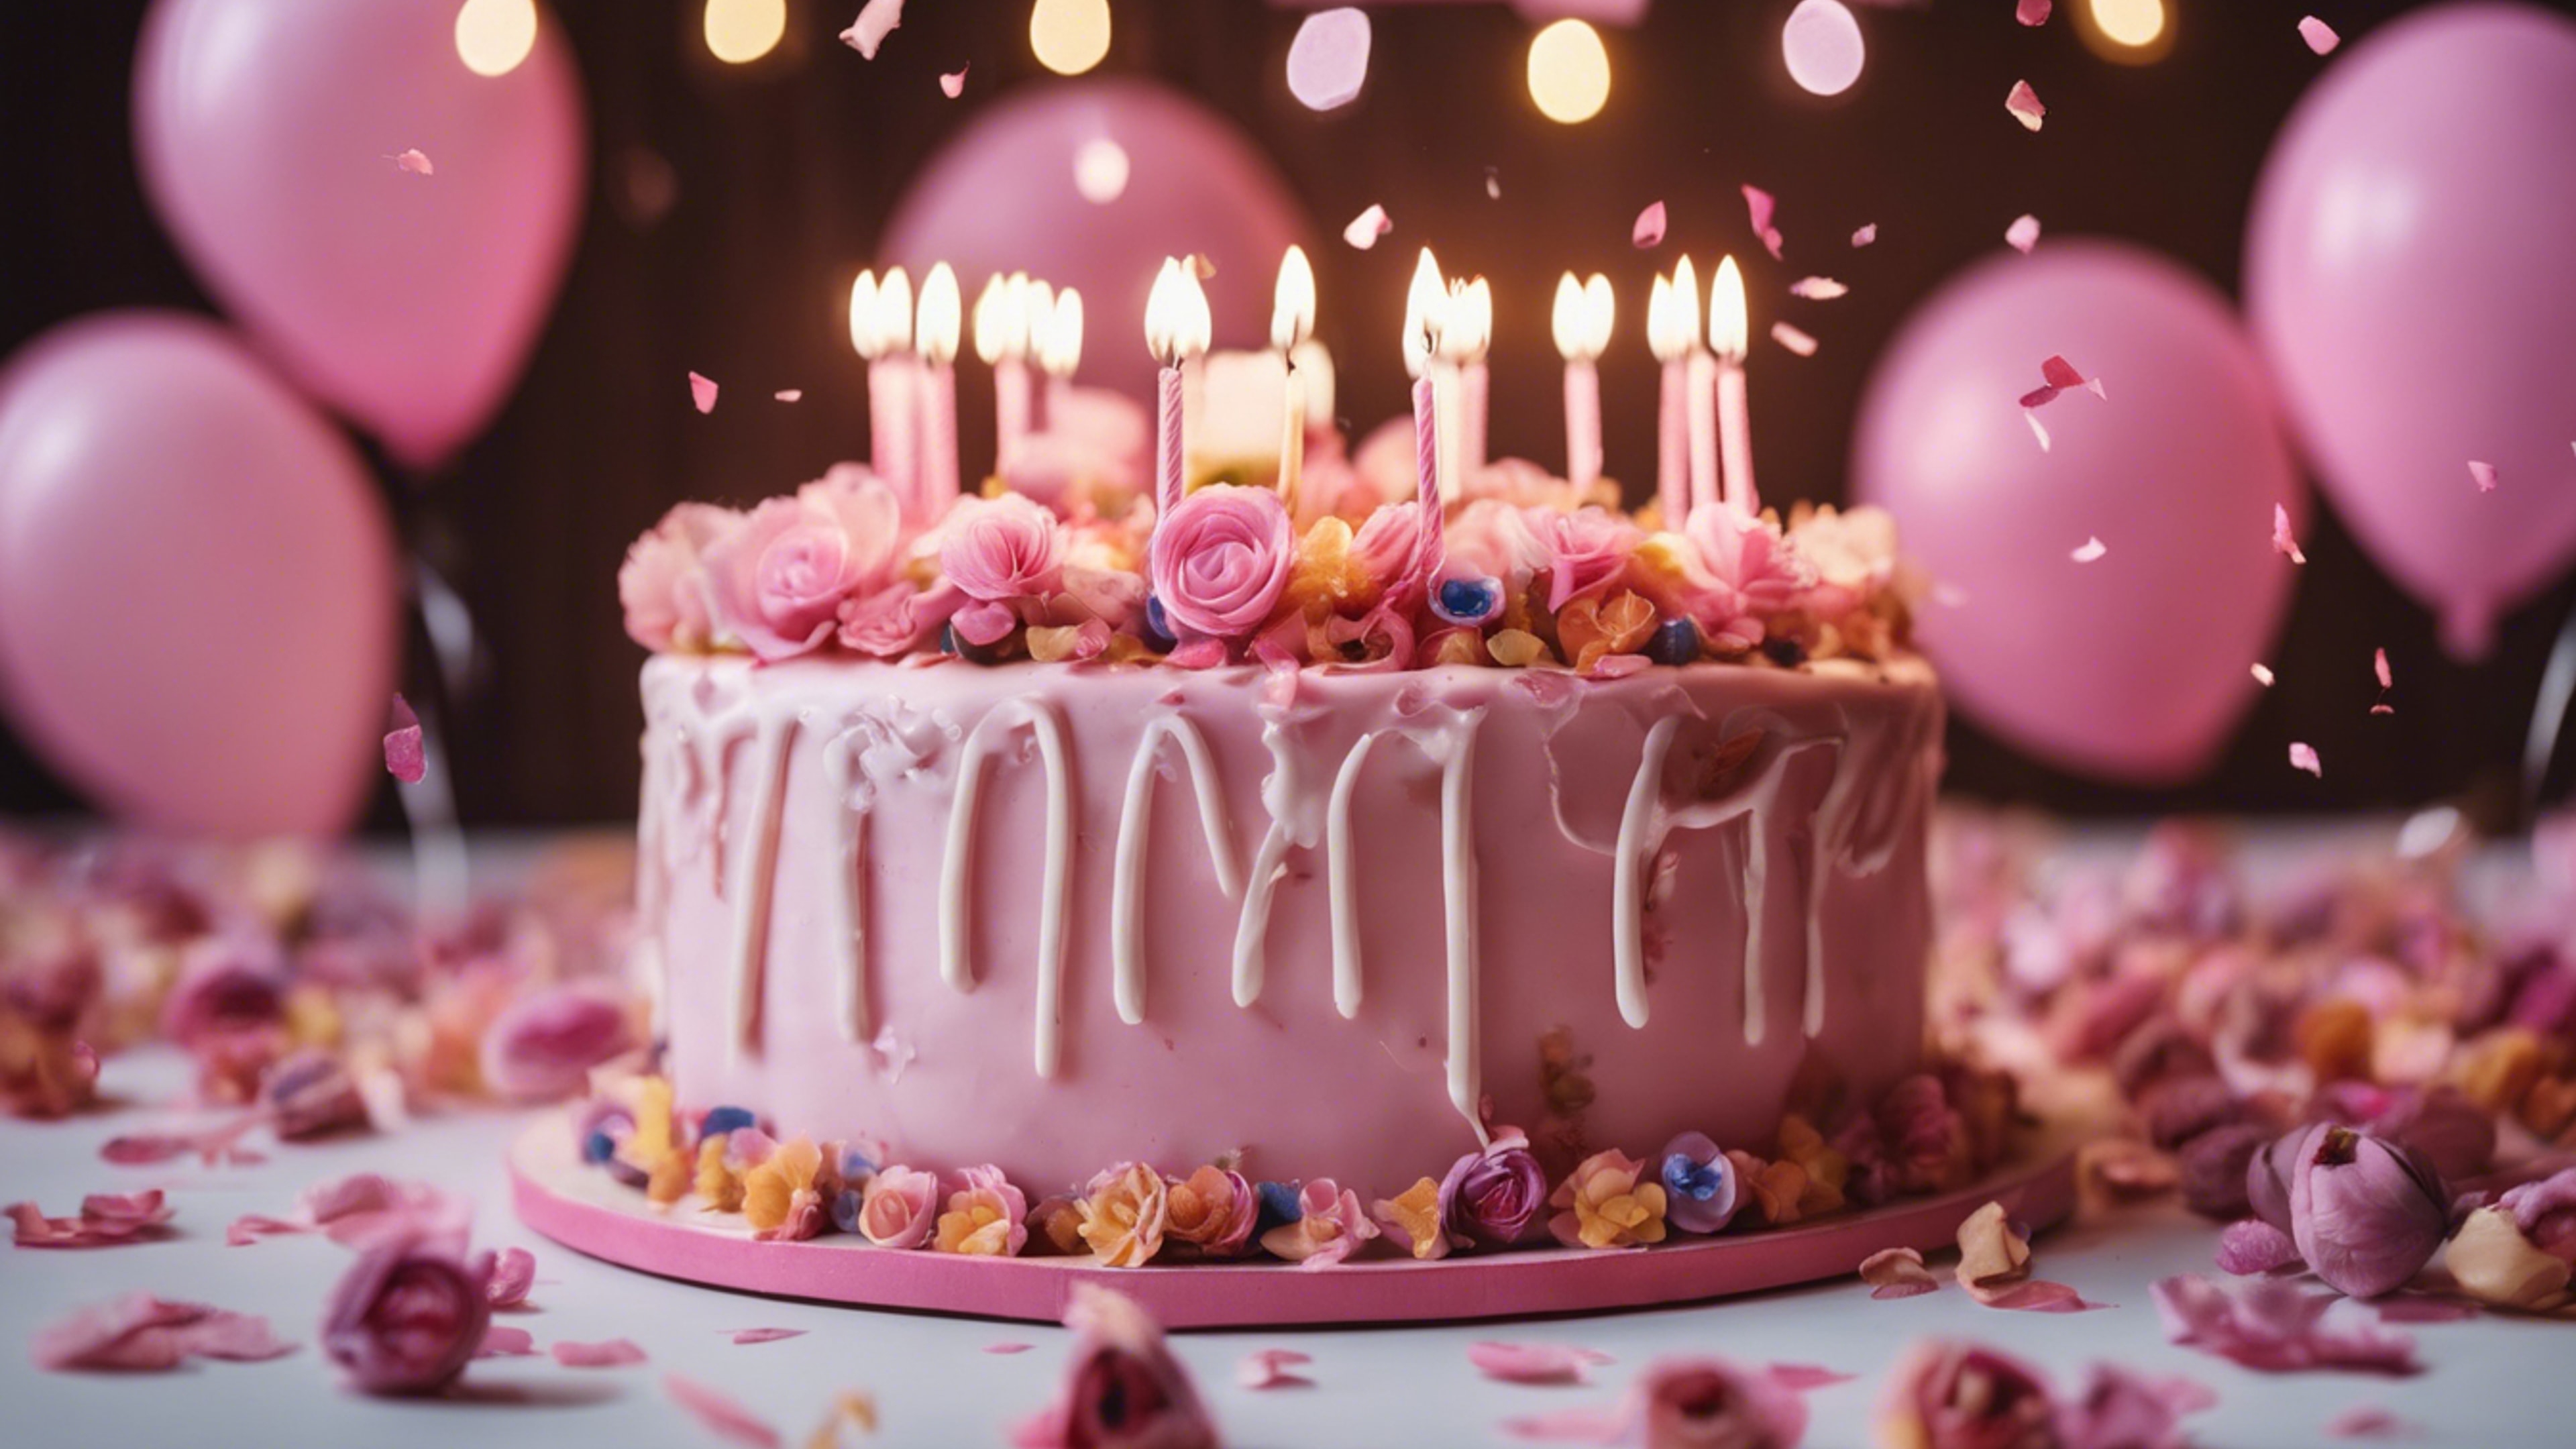 A girly birthday party with pink balloons, confetti, and a big cake decorated with edible flowers. Hình nền[43e1da28e36740768483]